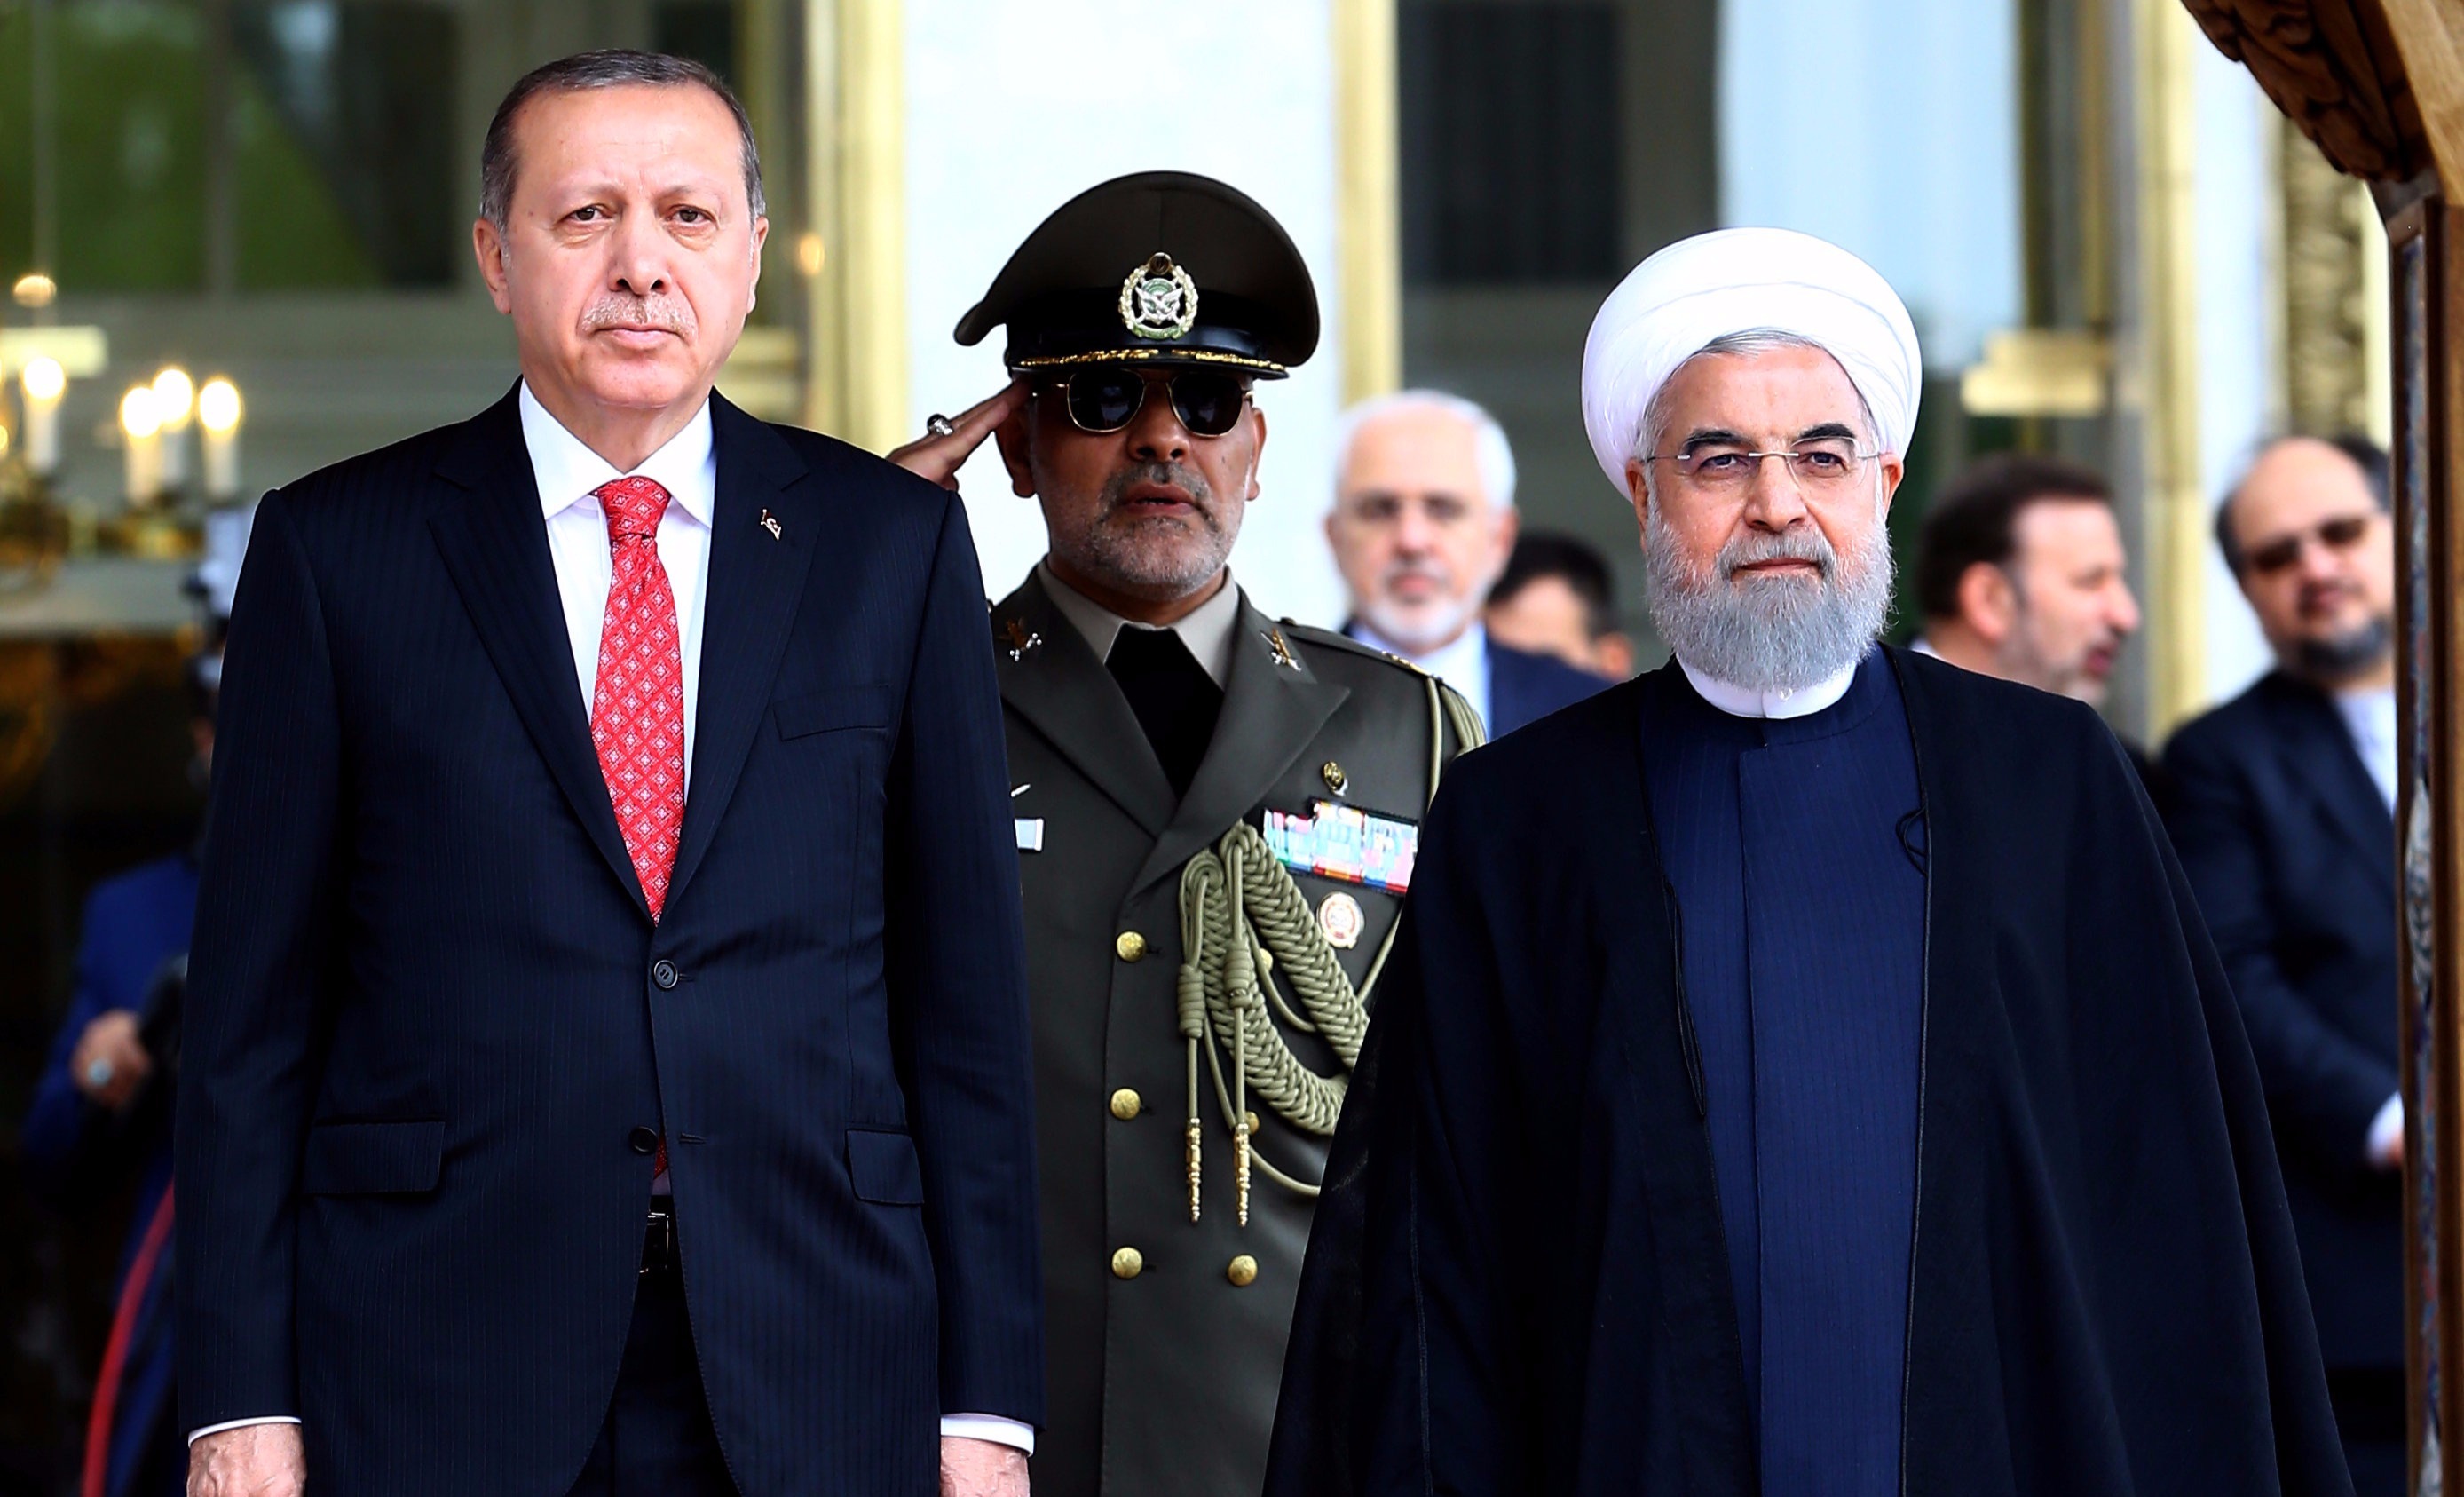 Turkish President Tayyip Erdogan is seen with Iranian President Hassan Rouhani during a welcoming ceremony in Tehran, Iran, Oct. 4, 2017.